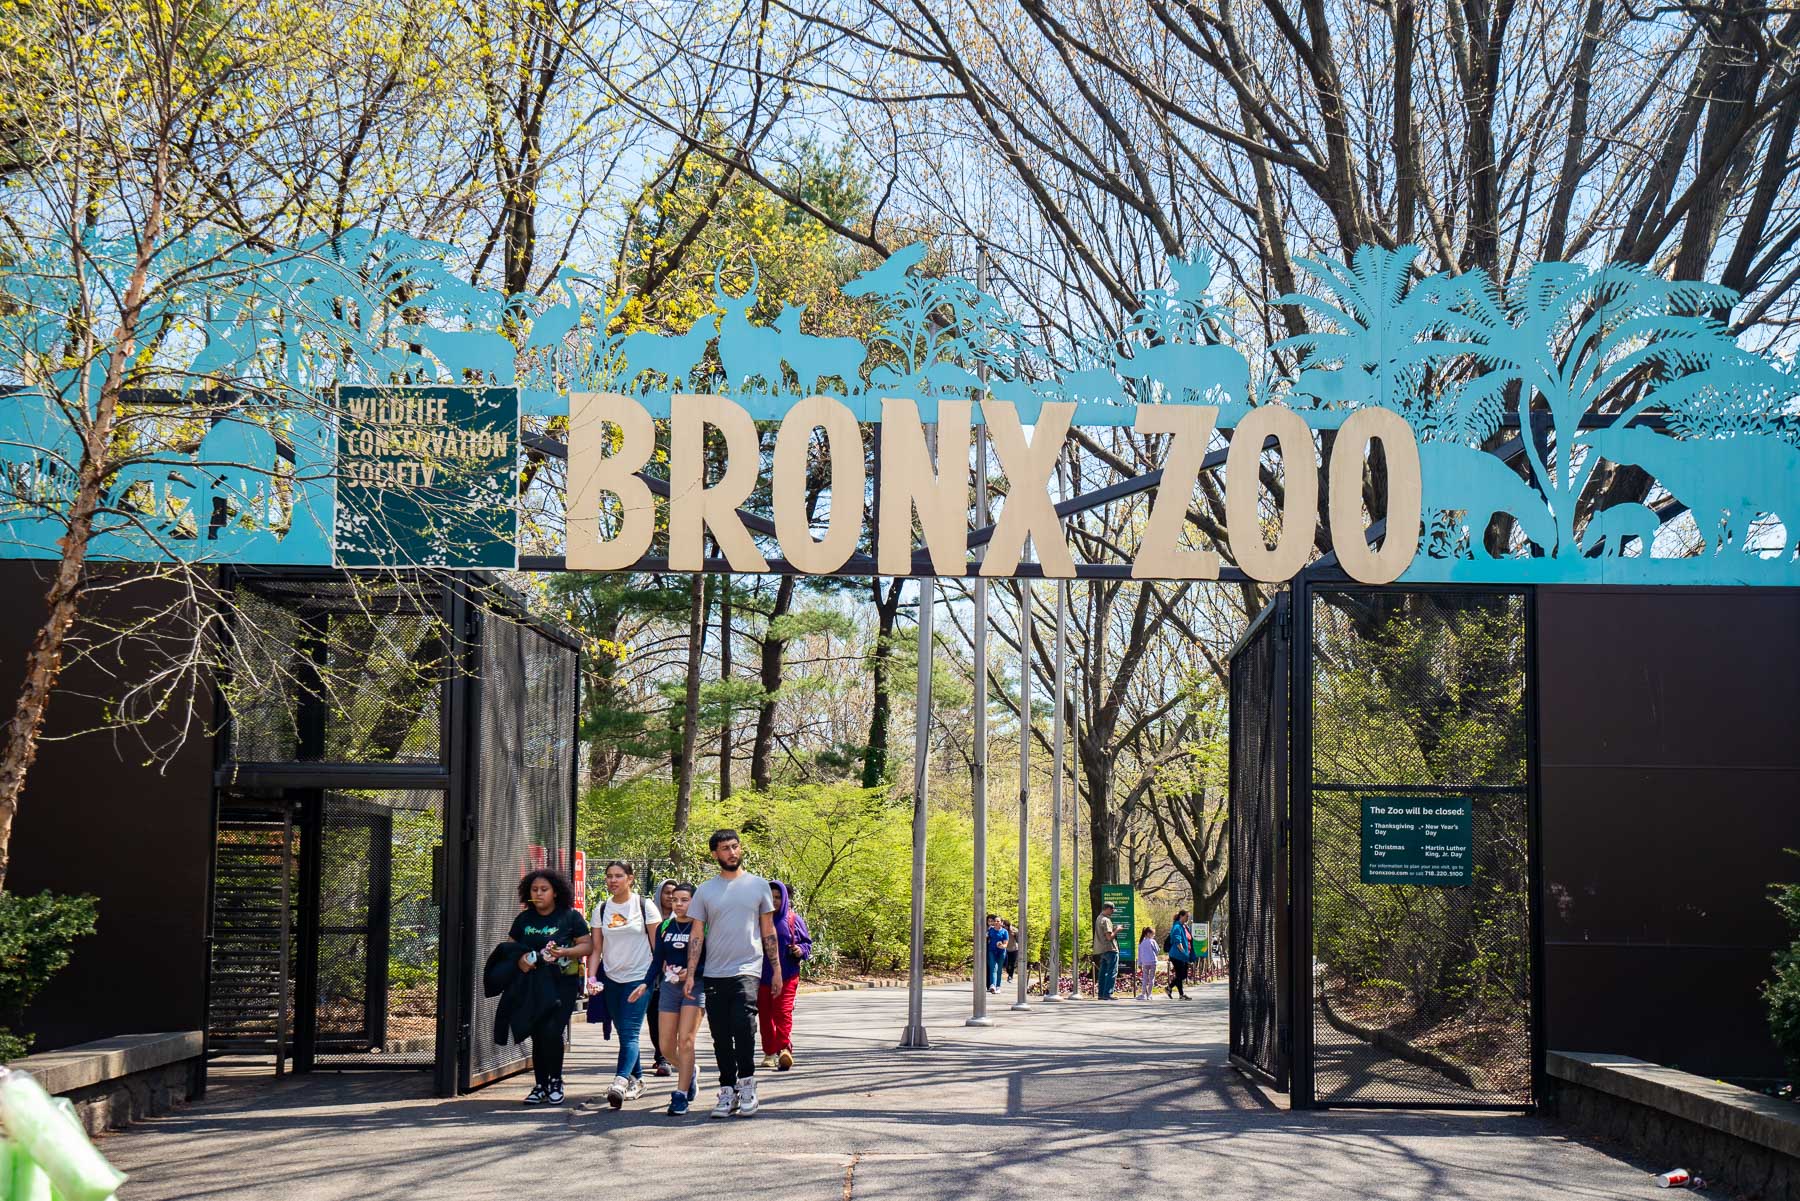 Kids walking under the blue and yellow Bronx Zoo sign on a sunny day that's illuminating the greenery